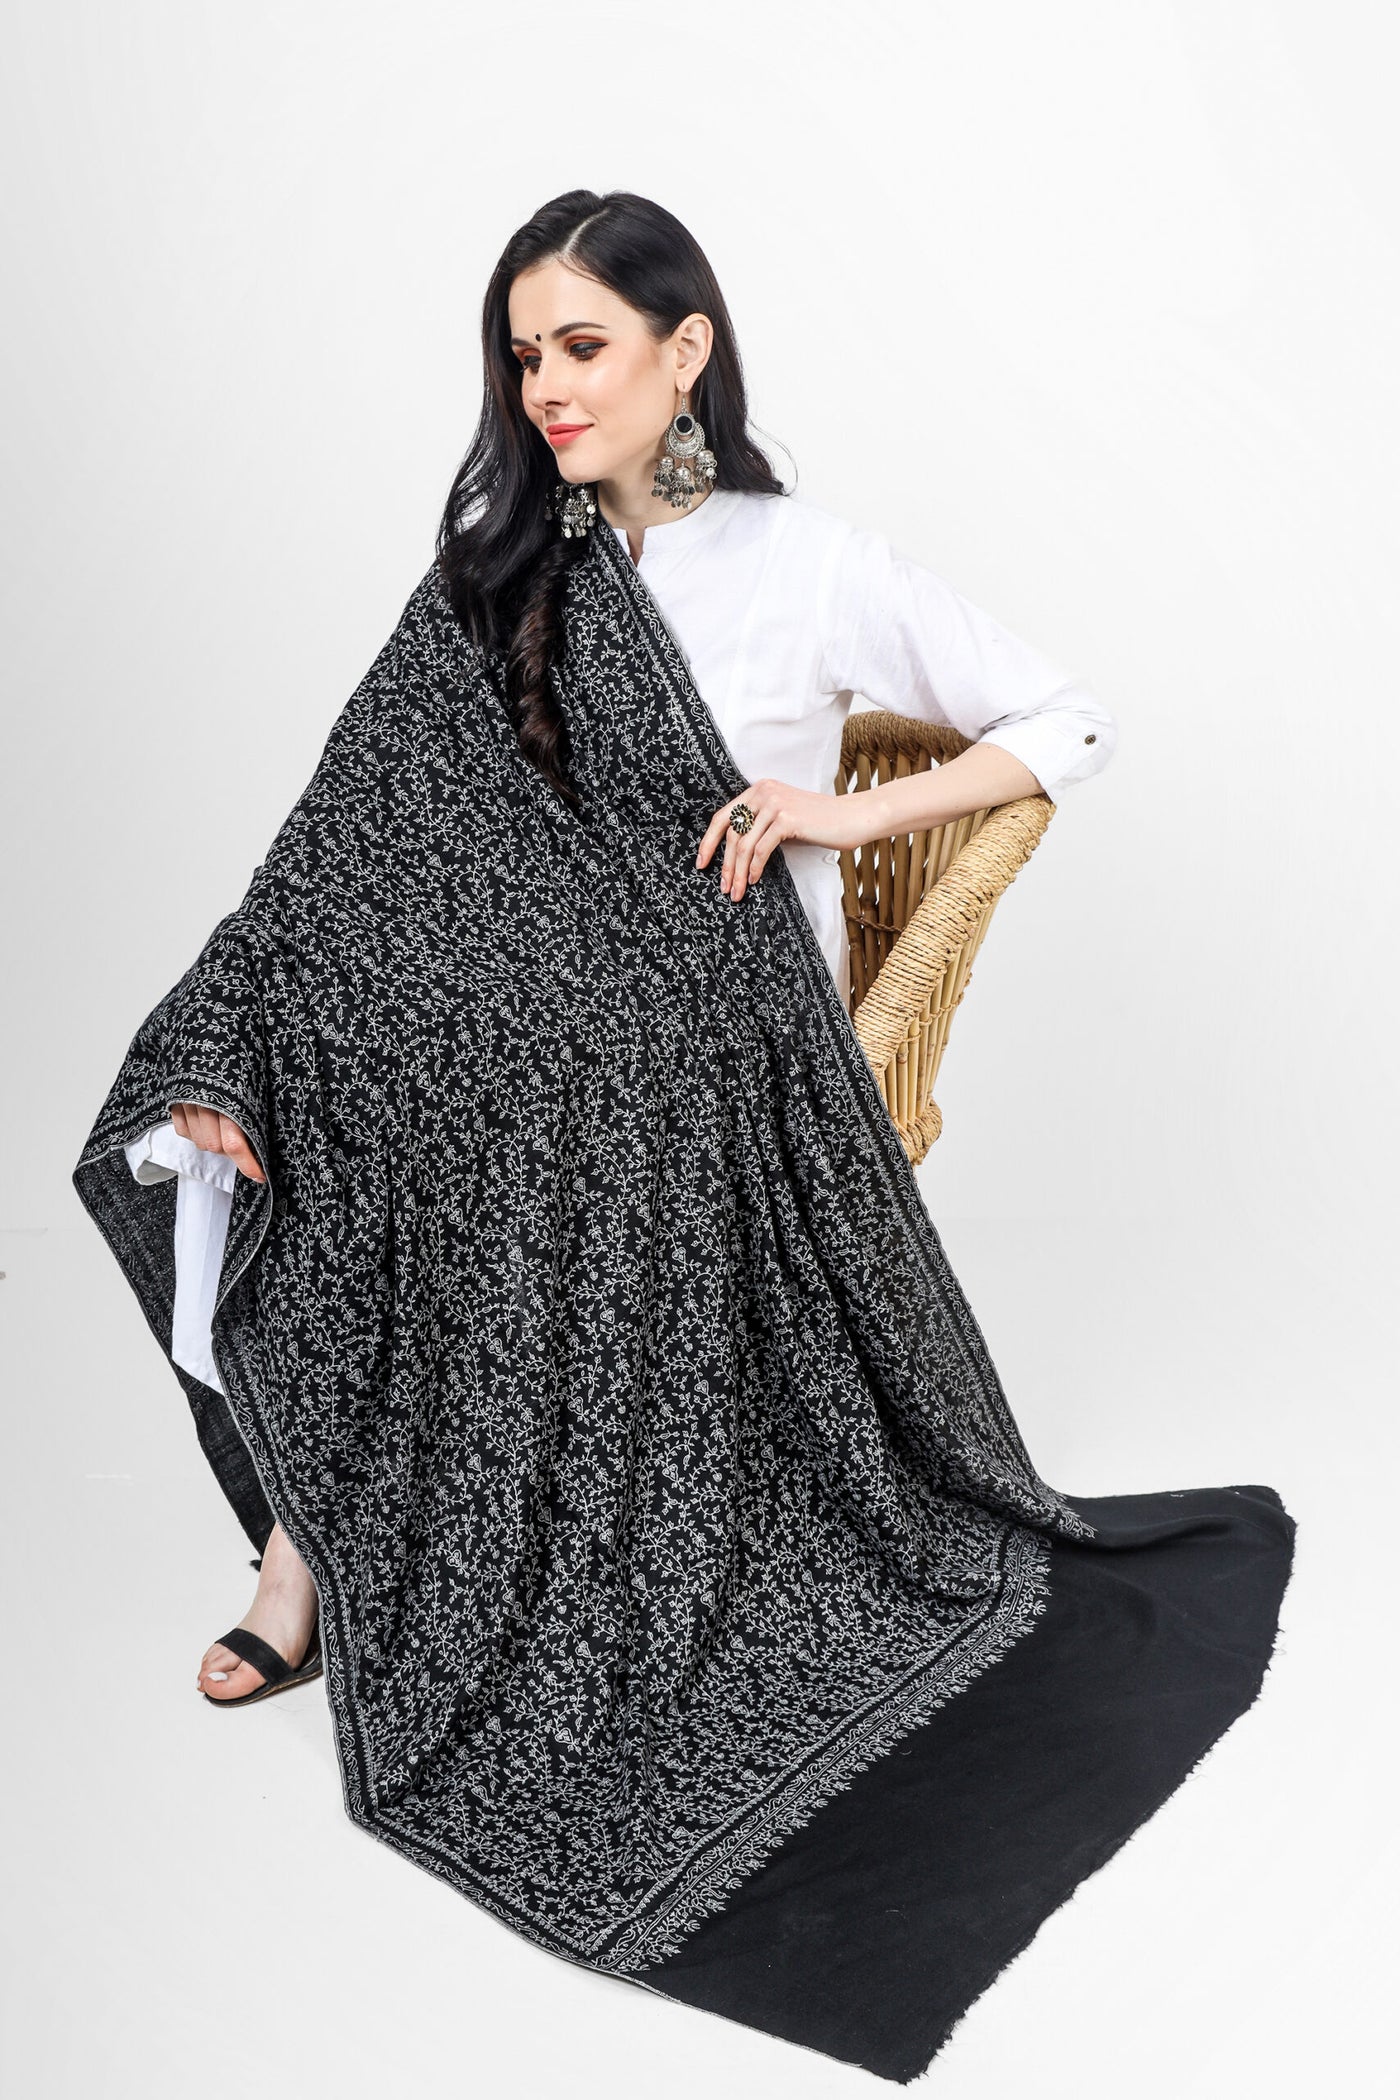 PASHMINA SHAWLS - Black Pashmina Jaldaar Silver Gray Embroidered Shawl. Elevate your style with this stunning accessory. Shop now at Kepra.